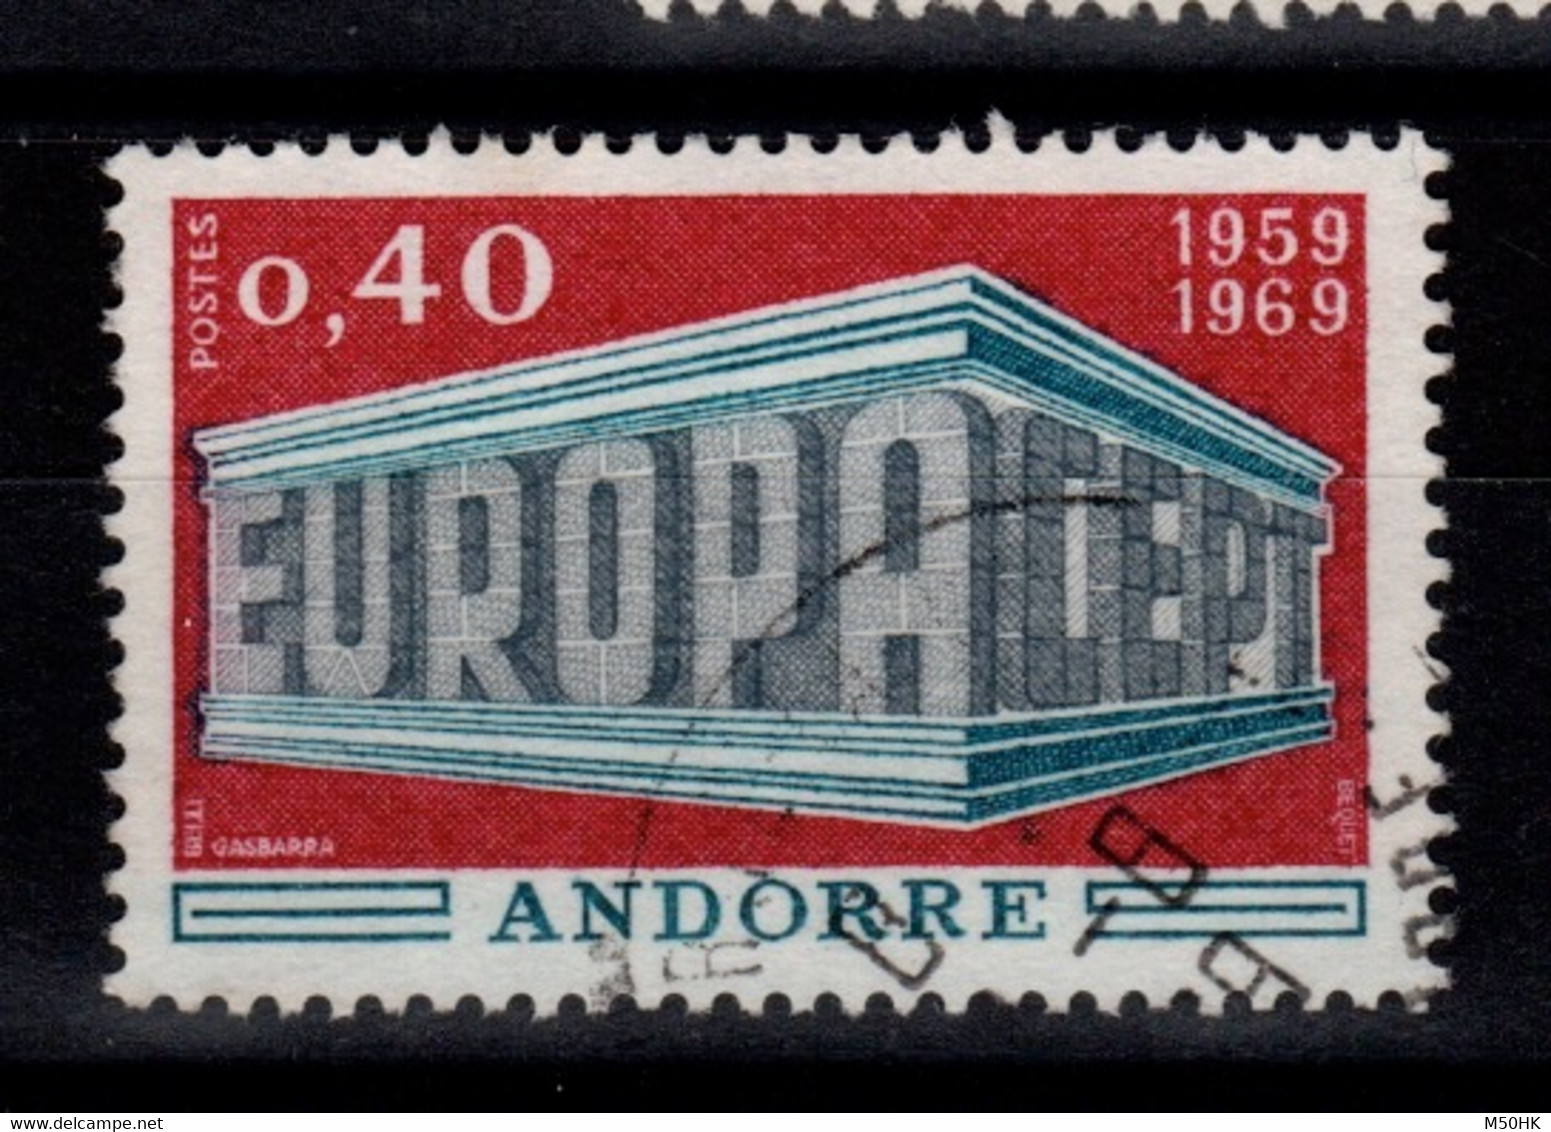 Andorre - YV 194 Oblitere , Europa 1969 - Used Stamps